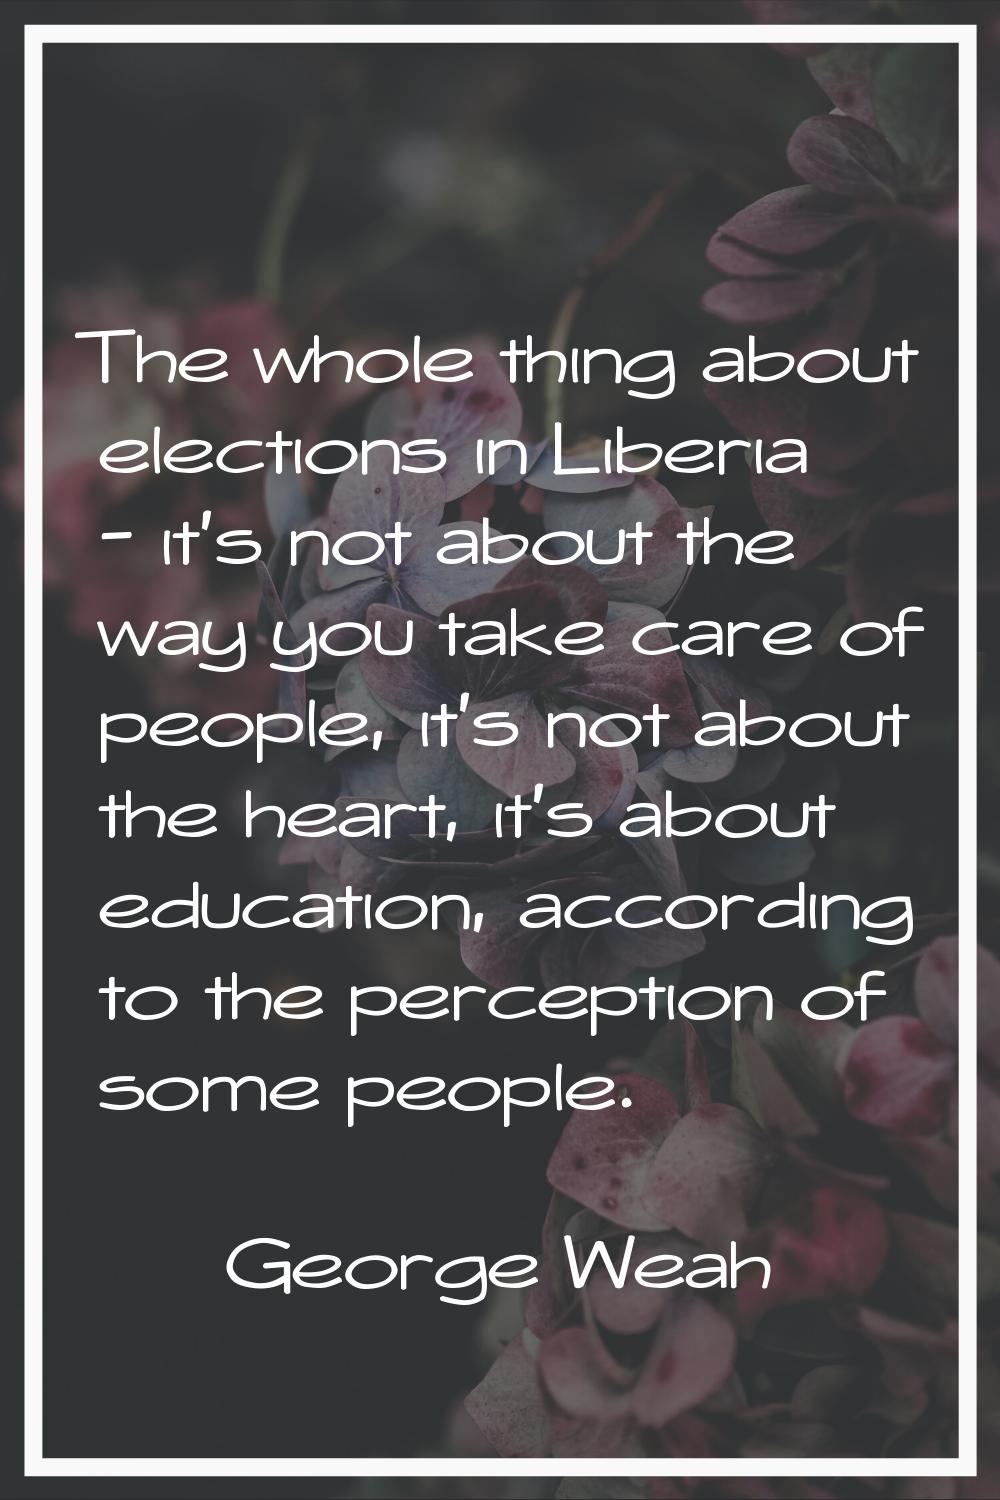 The whole thing about elections in Liberia - it's not about the way you take care of people, it's n